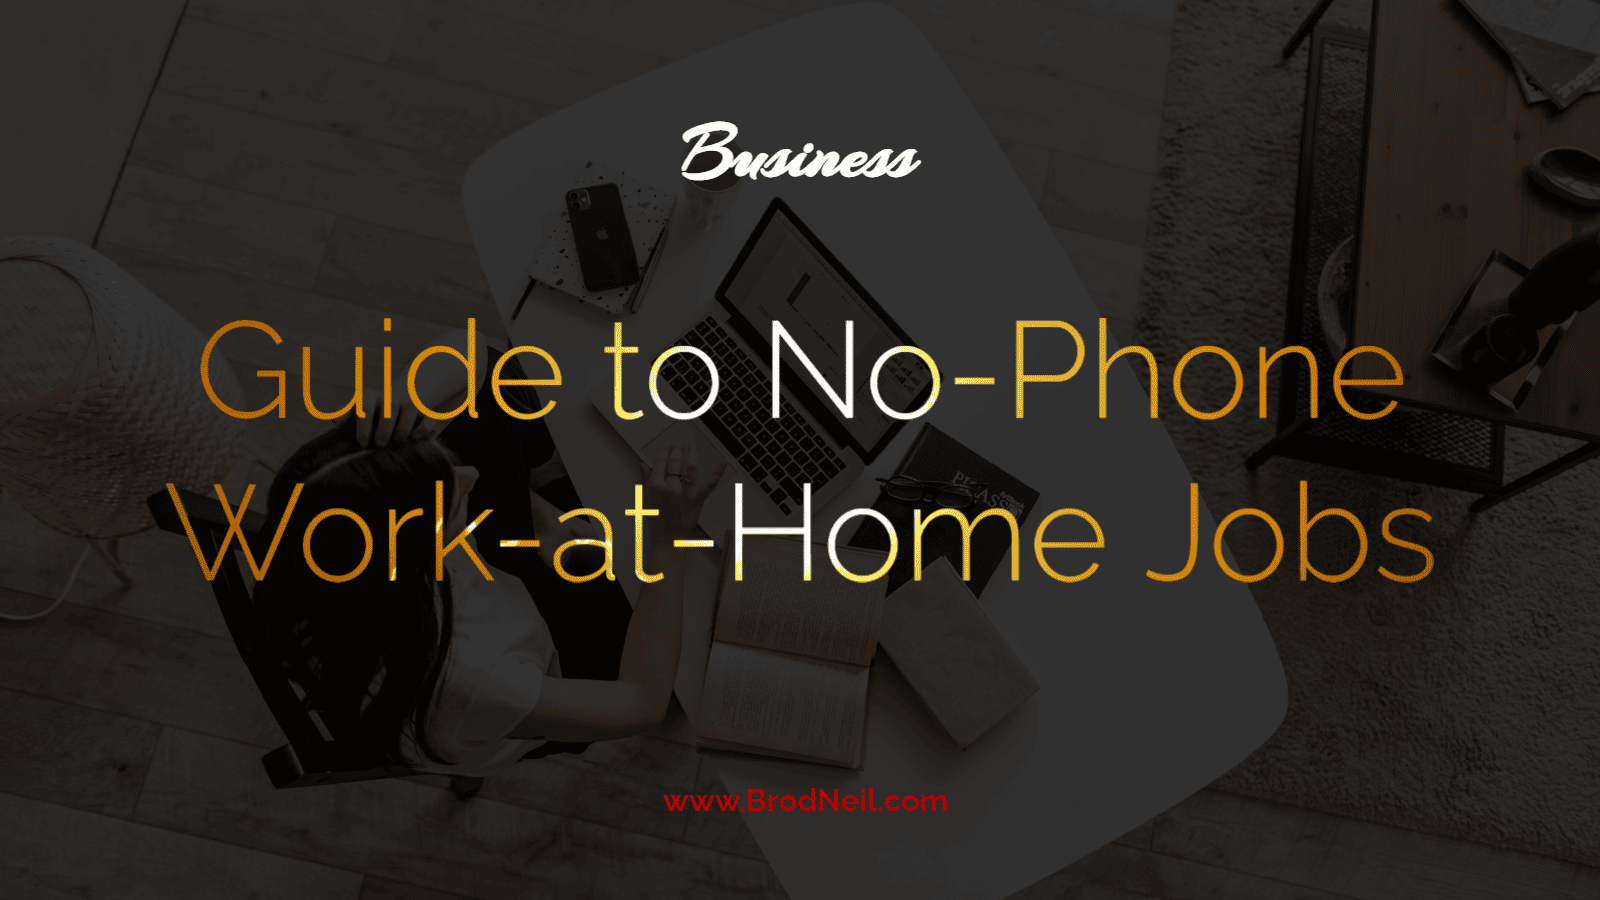 Guide to No-Phone Work-at-Home Jobs